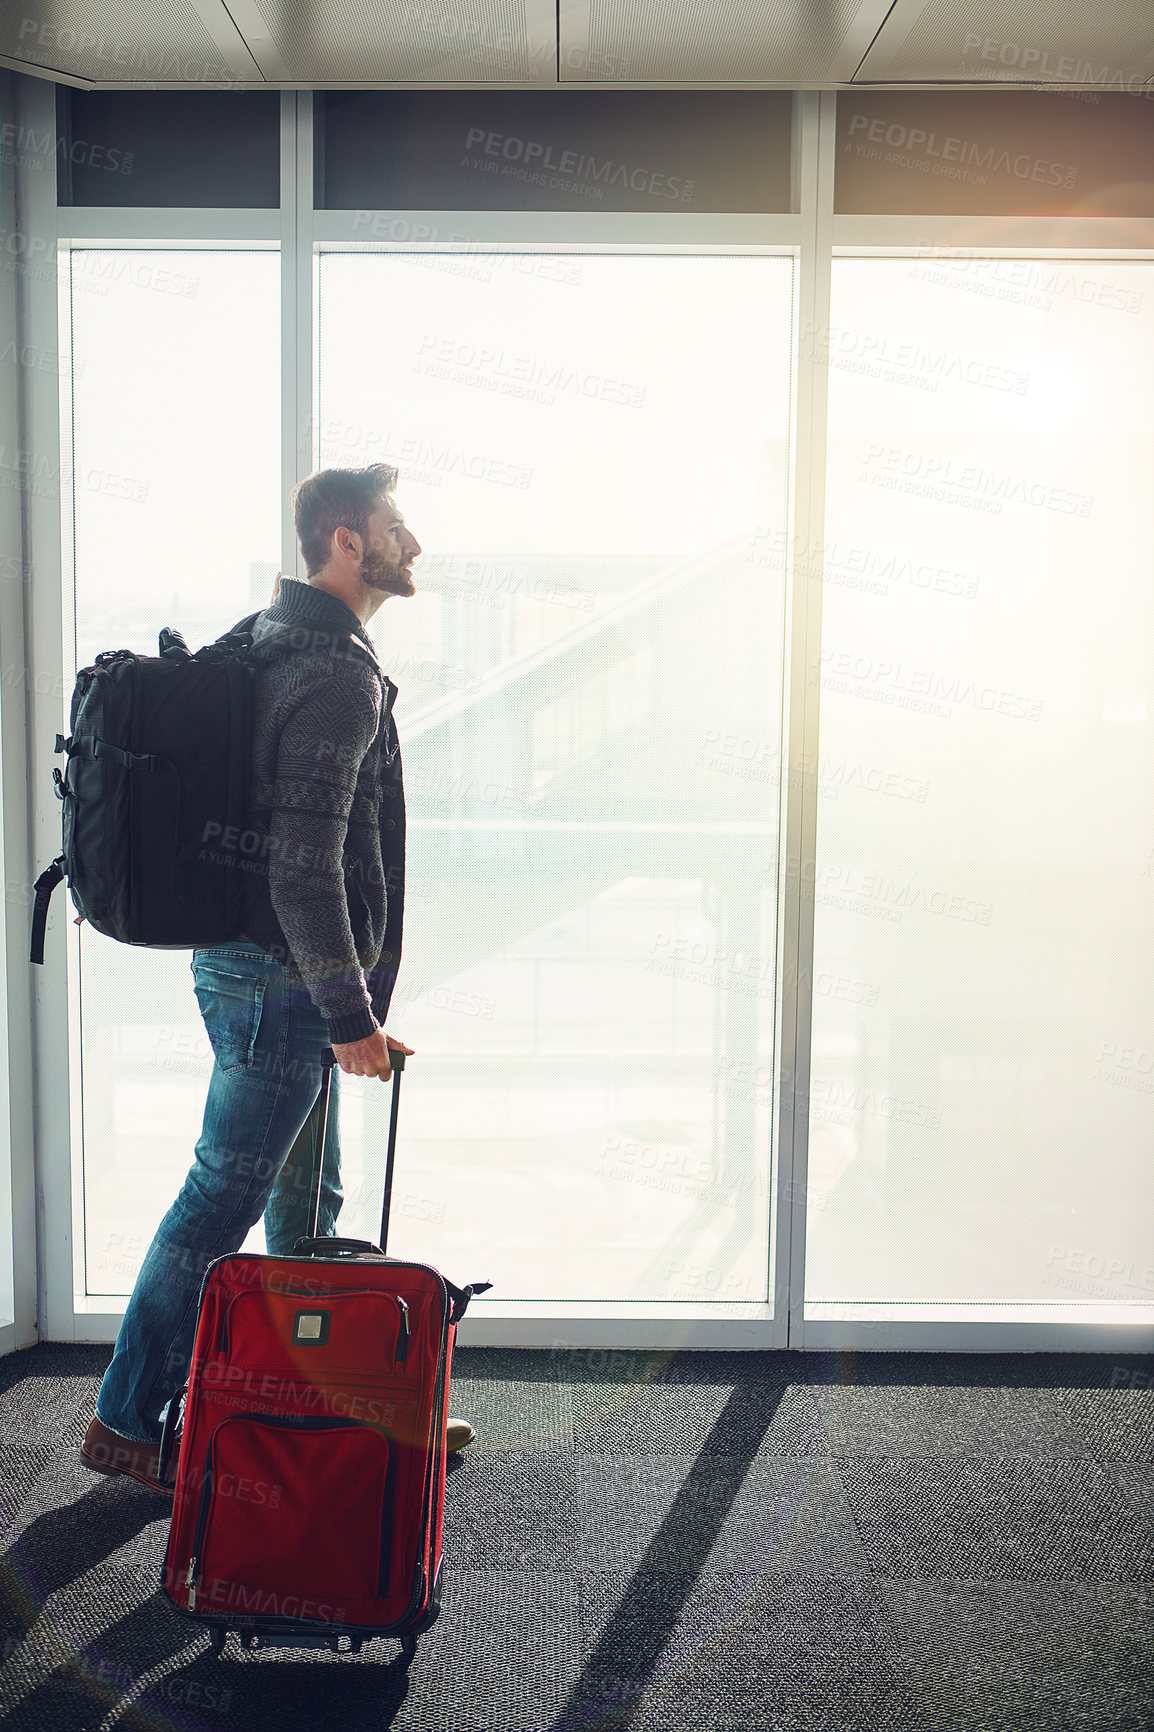 Buy stock photo Shot of a young man standing in an airport with luggage and looking at someone or something in front of him